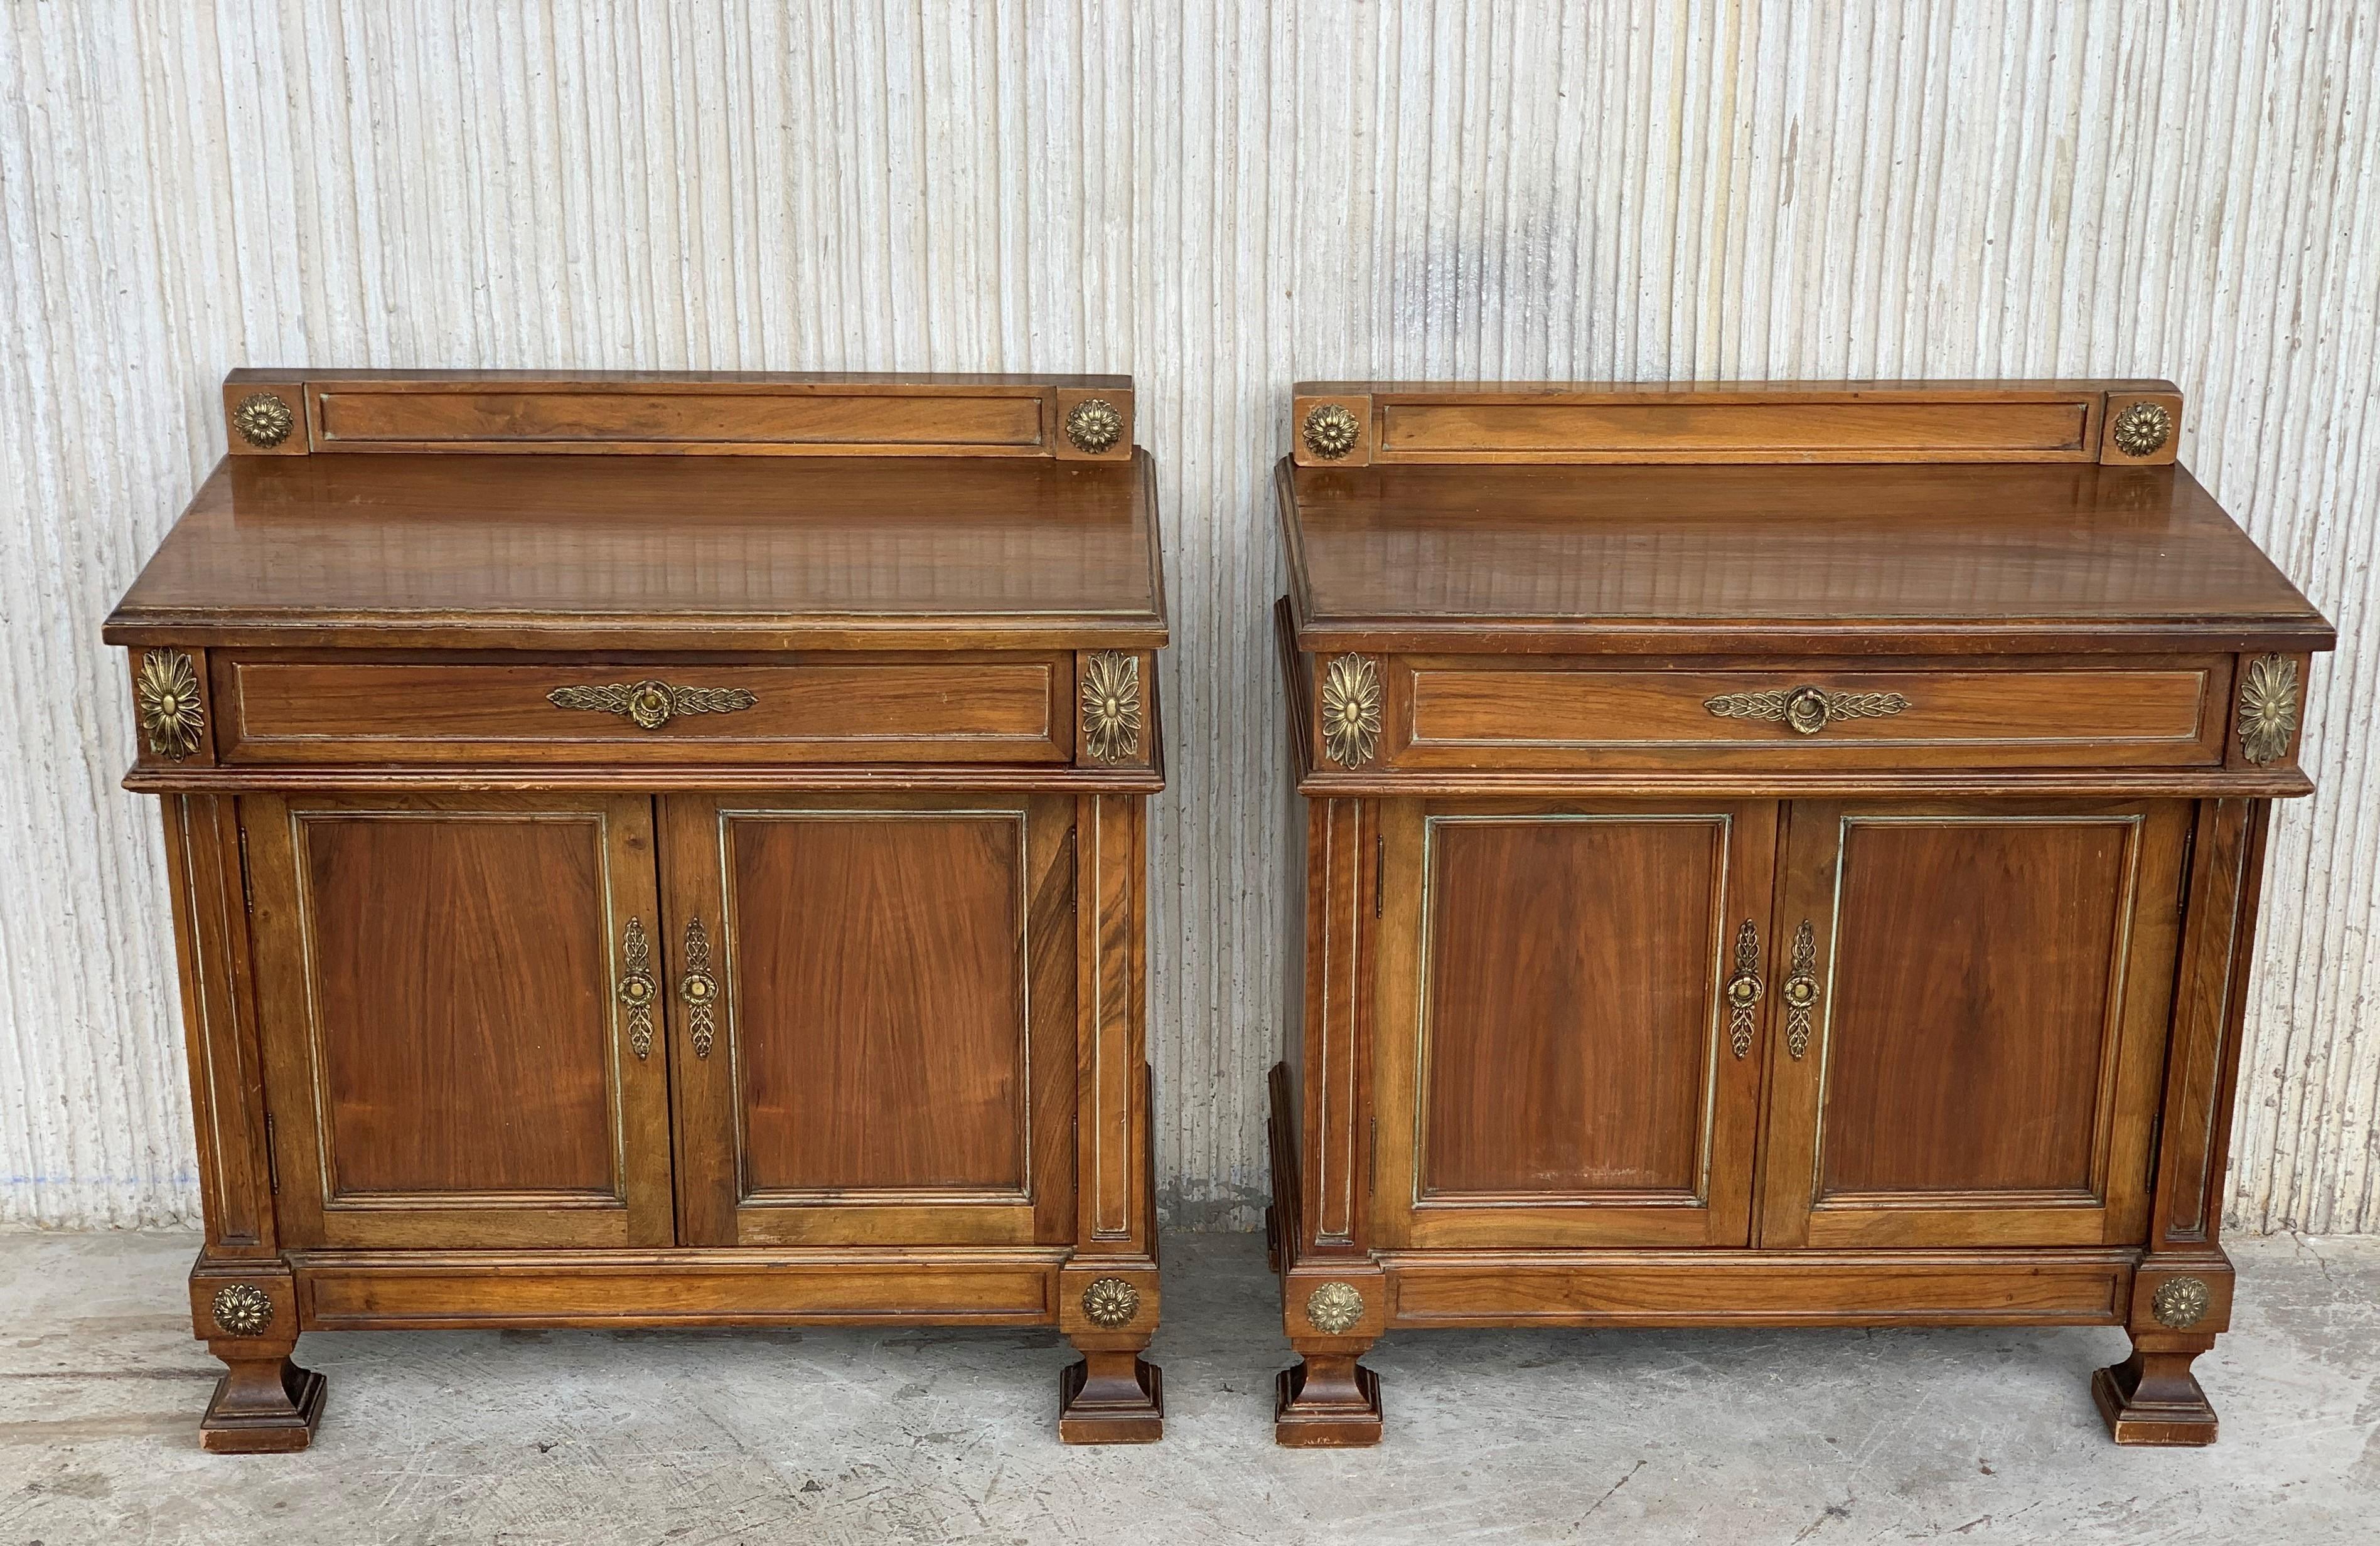 Pair of French heavily bedside tables nightstands with crest and bronze details, circa 1920
One drawer and two-door with compartments.

You can remove easily the crest.